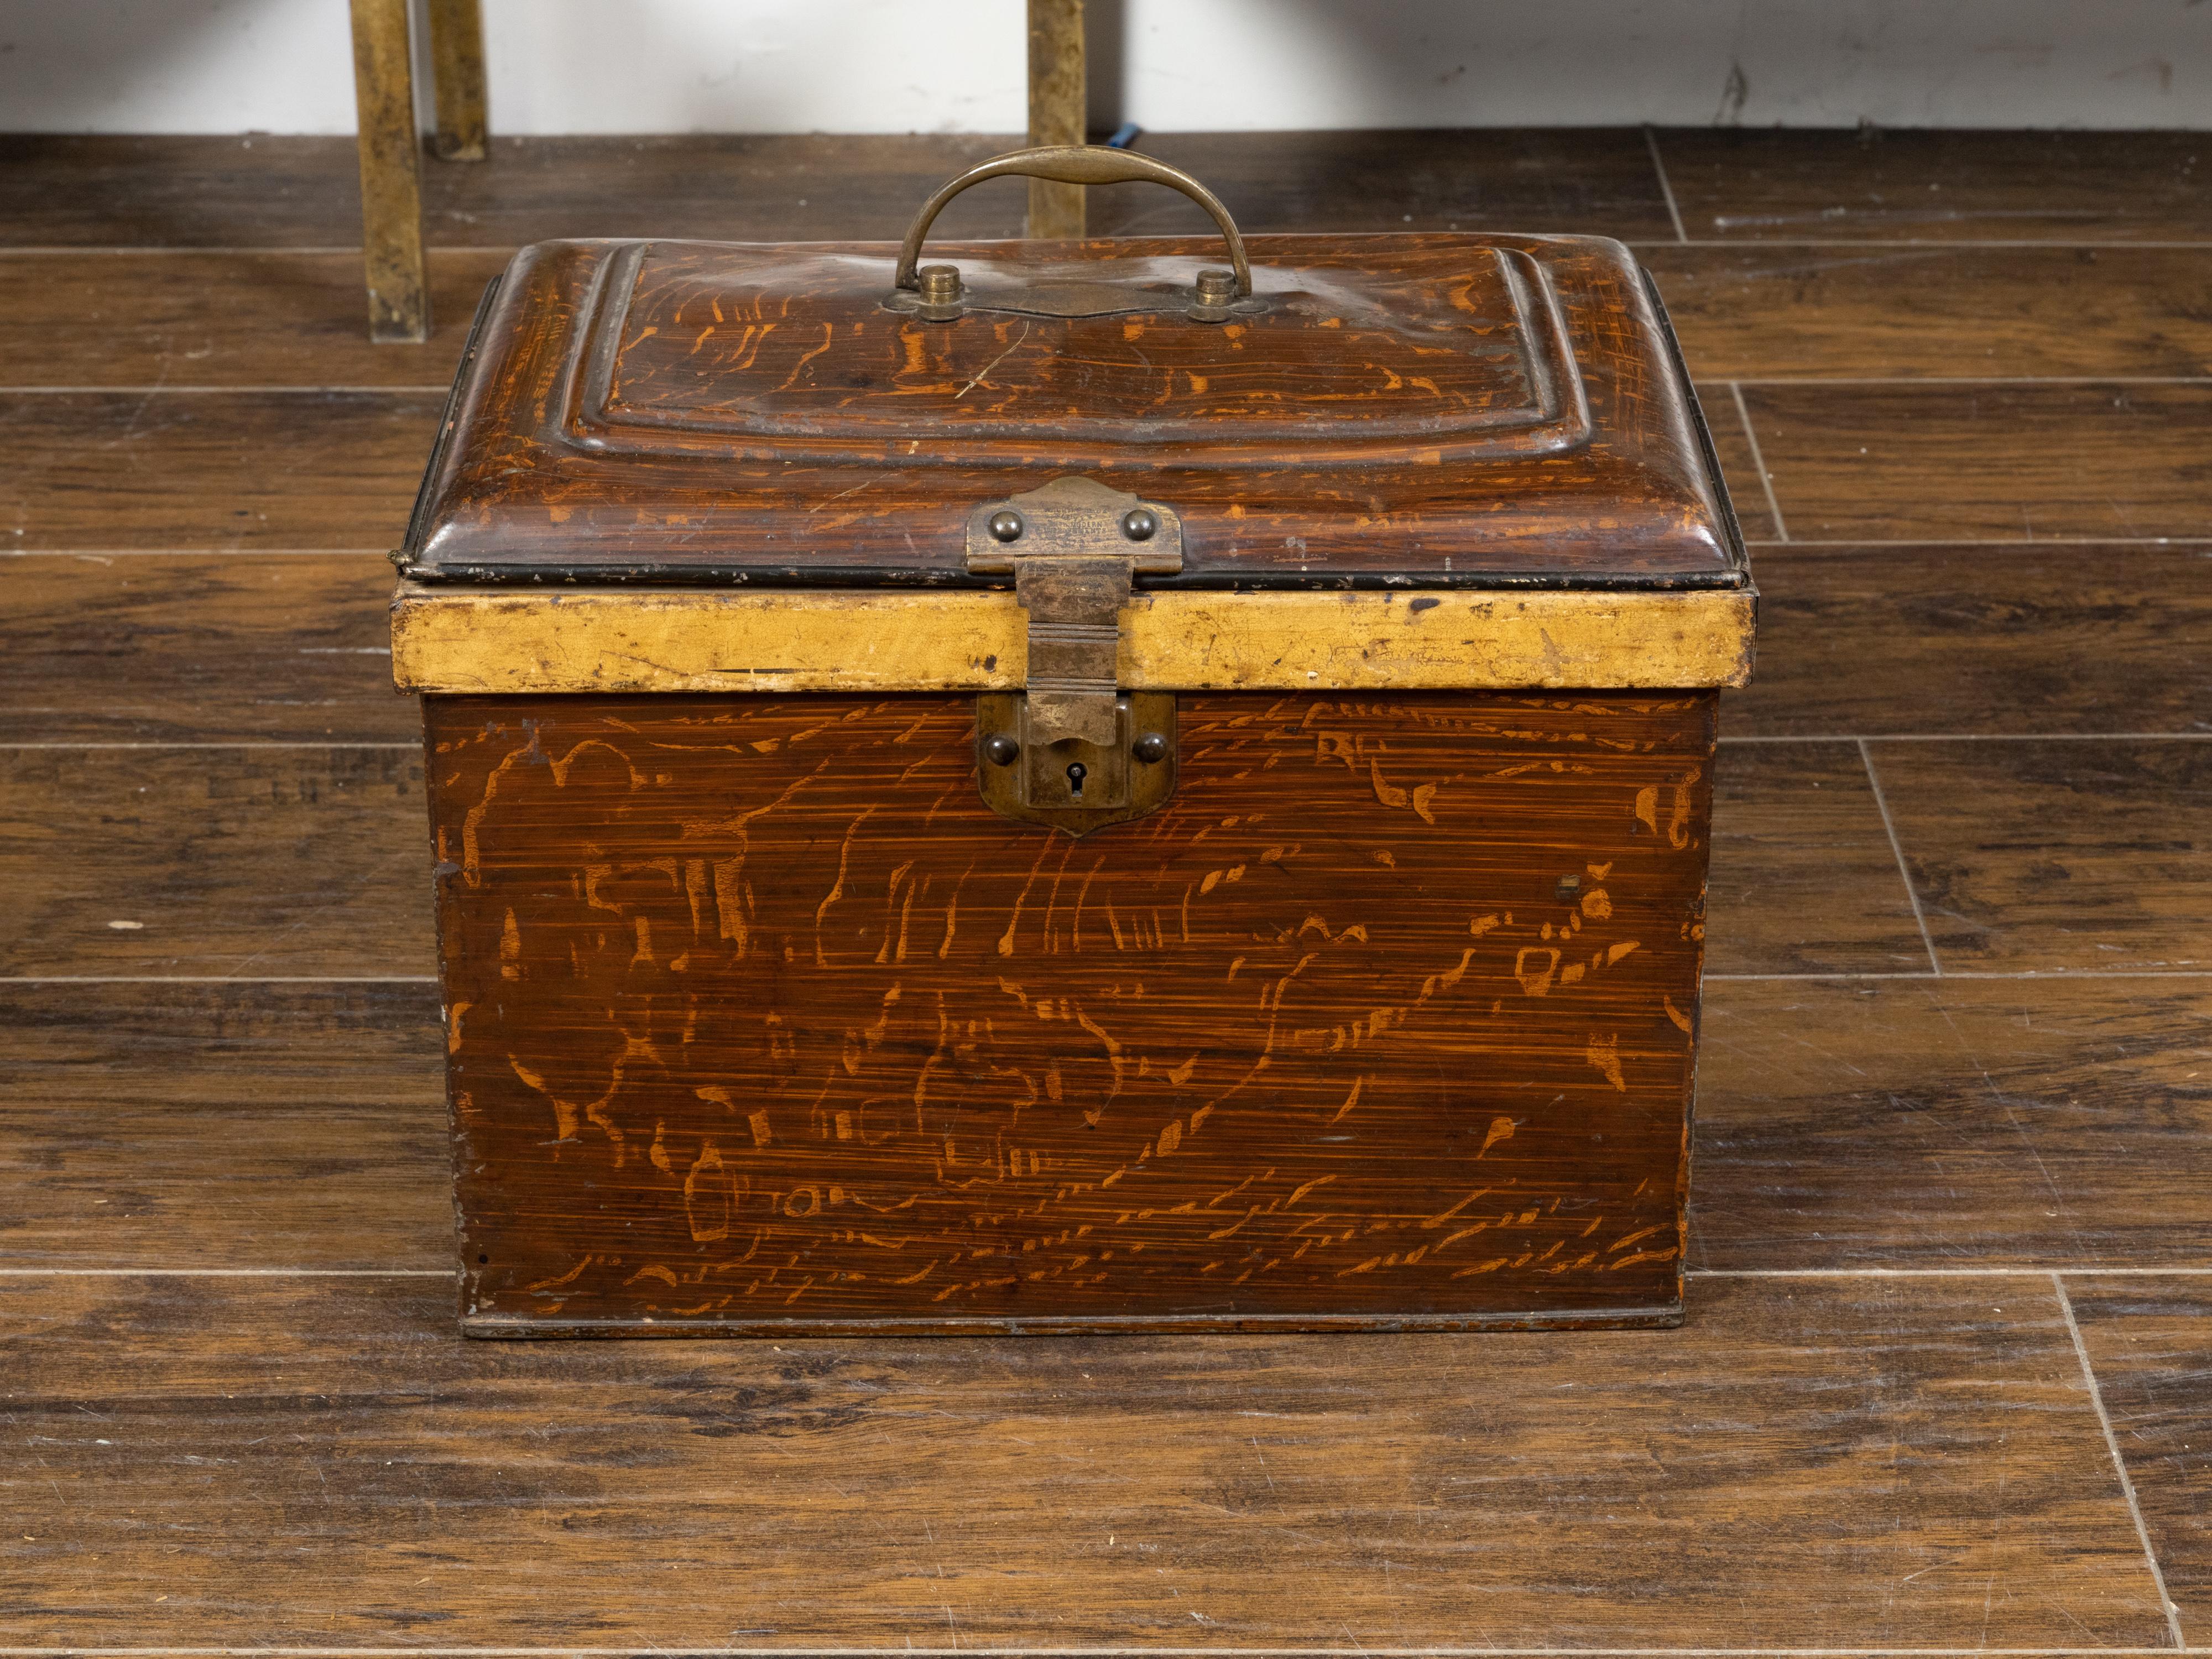 A French painted tôle box from the late 19th century, with wood grain patterns and goldenrod accents. Created in France during the last decade of the 19th century, this tôle box features a rectangular Silhouette perfectly complimented by a rustic